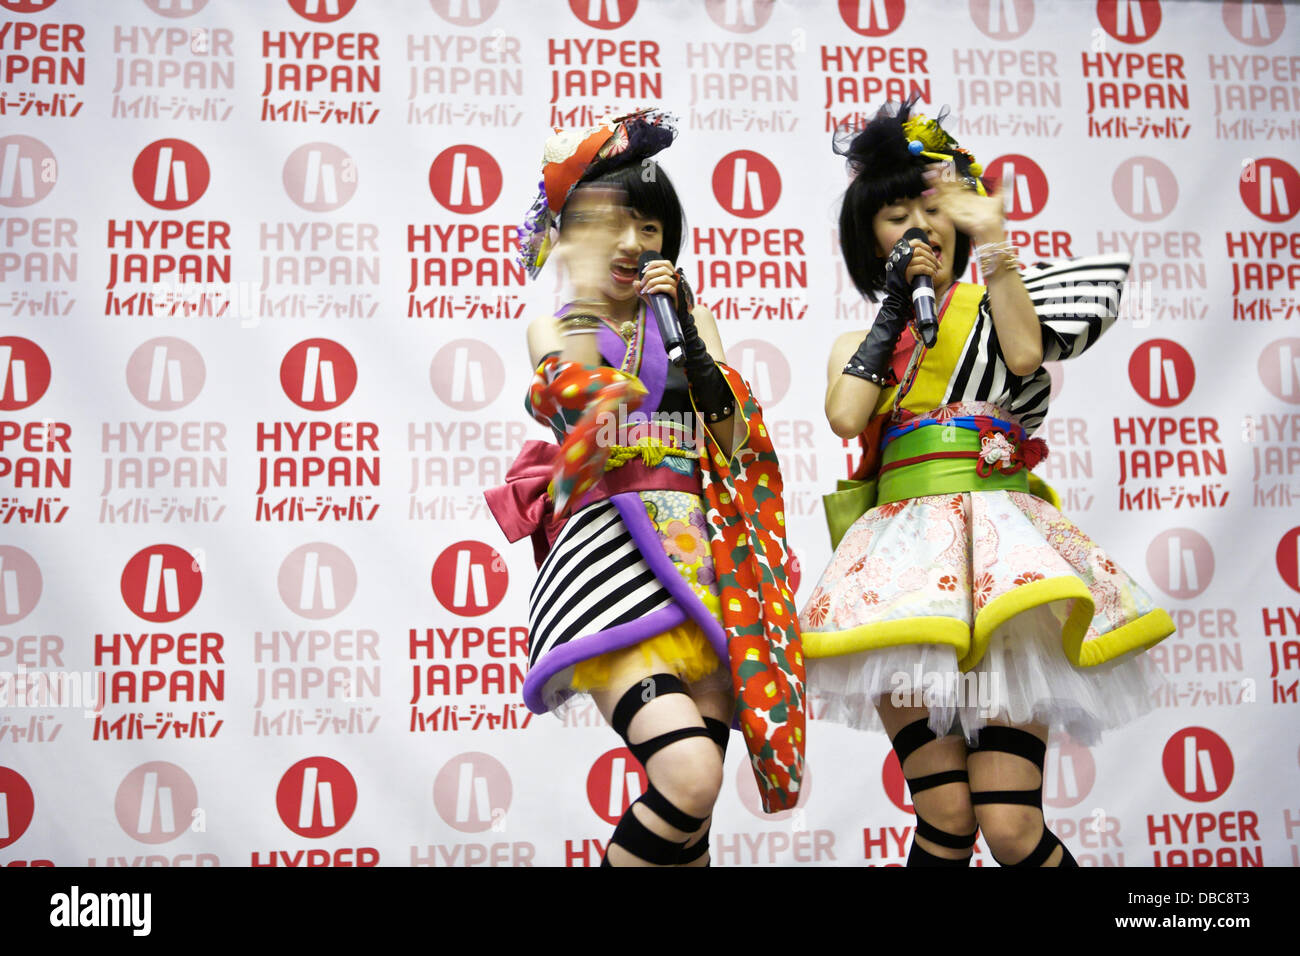 Earls Court, ,London UK. 27th July, 2013. Yanakiku, who represent Japanese pop culture, perform live on stage at Hyper Japan. Credit:  Tony Farrugia/Alamy Live News Stock Photo